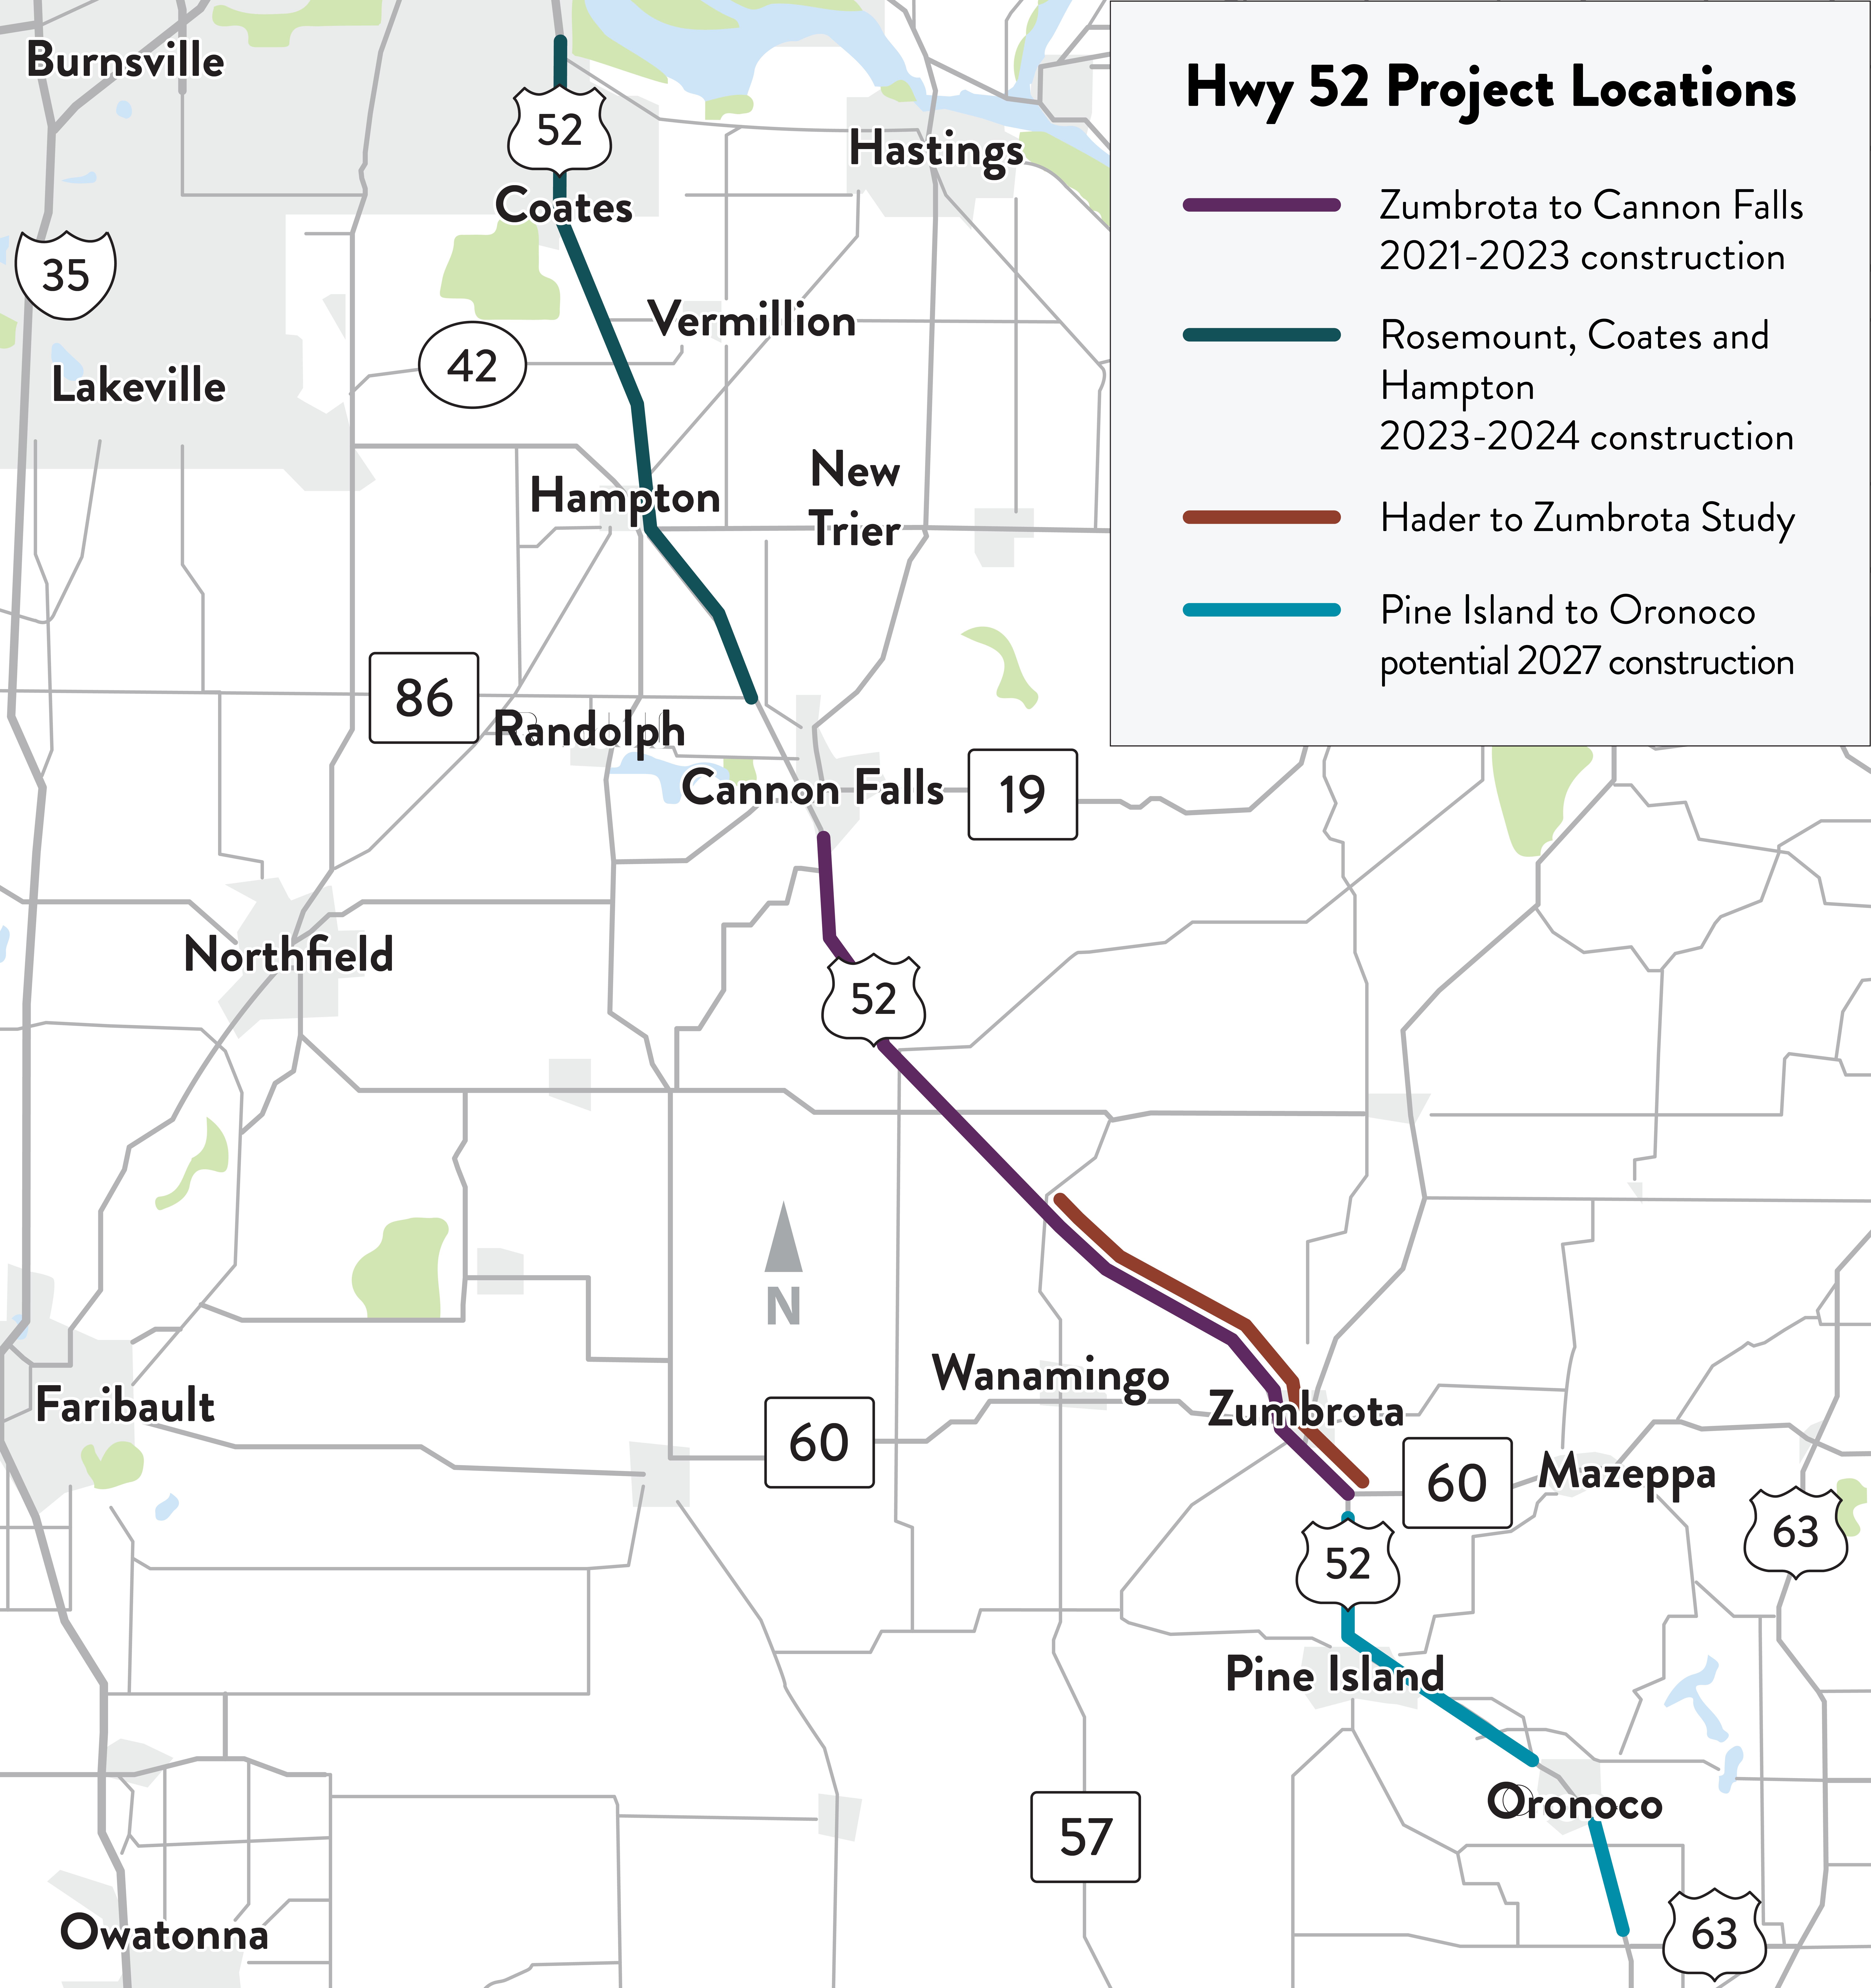 Hwy 52 project locations